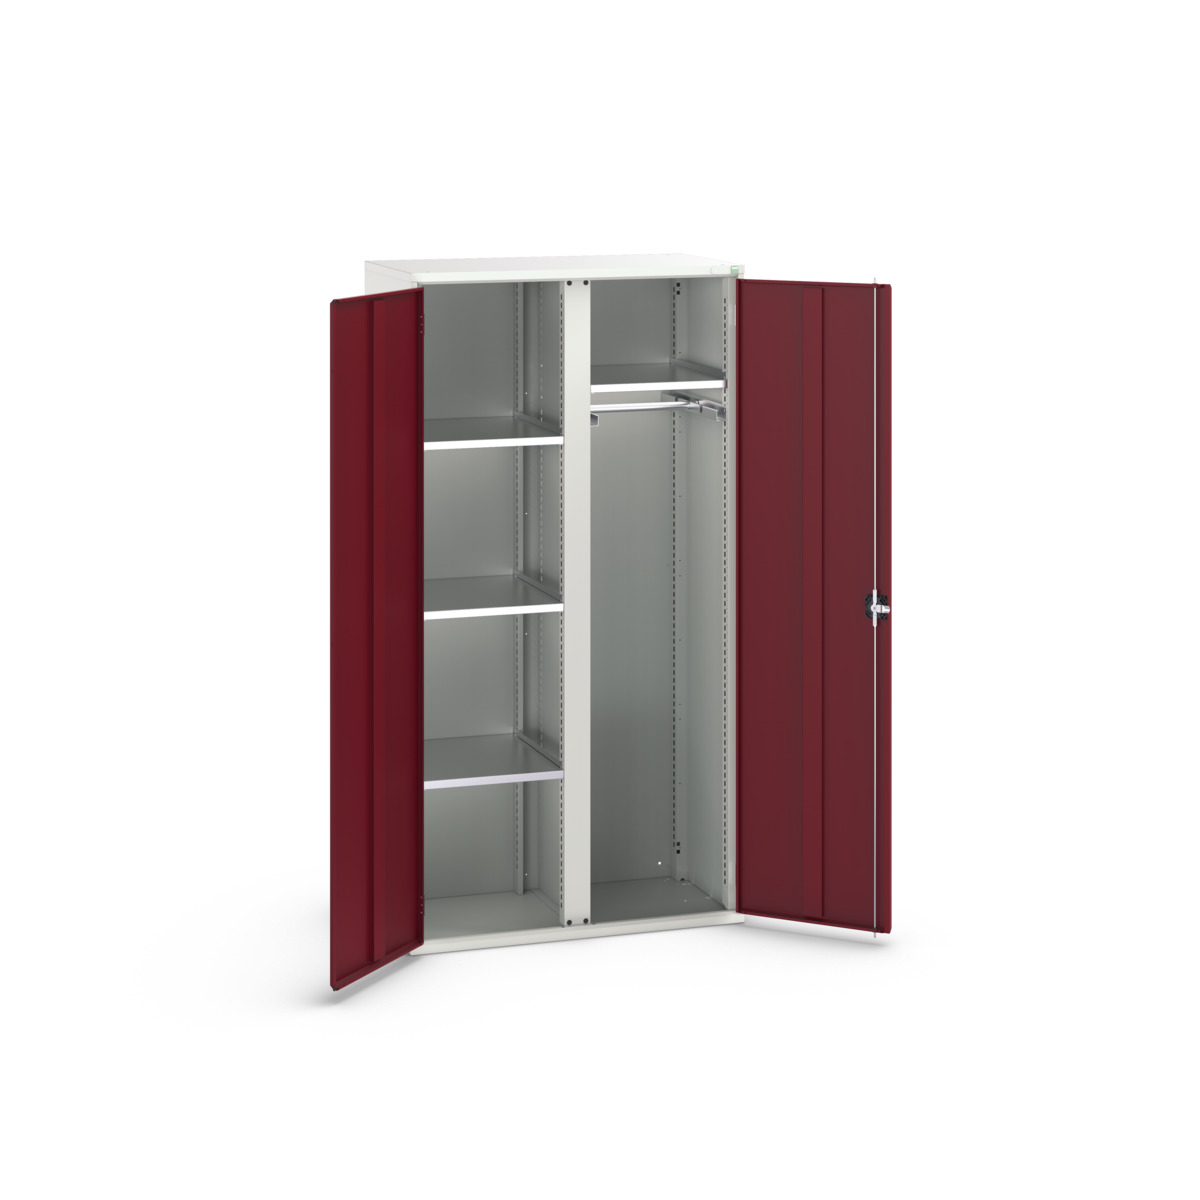 16926579.24 - verso kitted cupboard